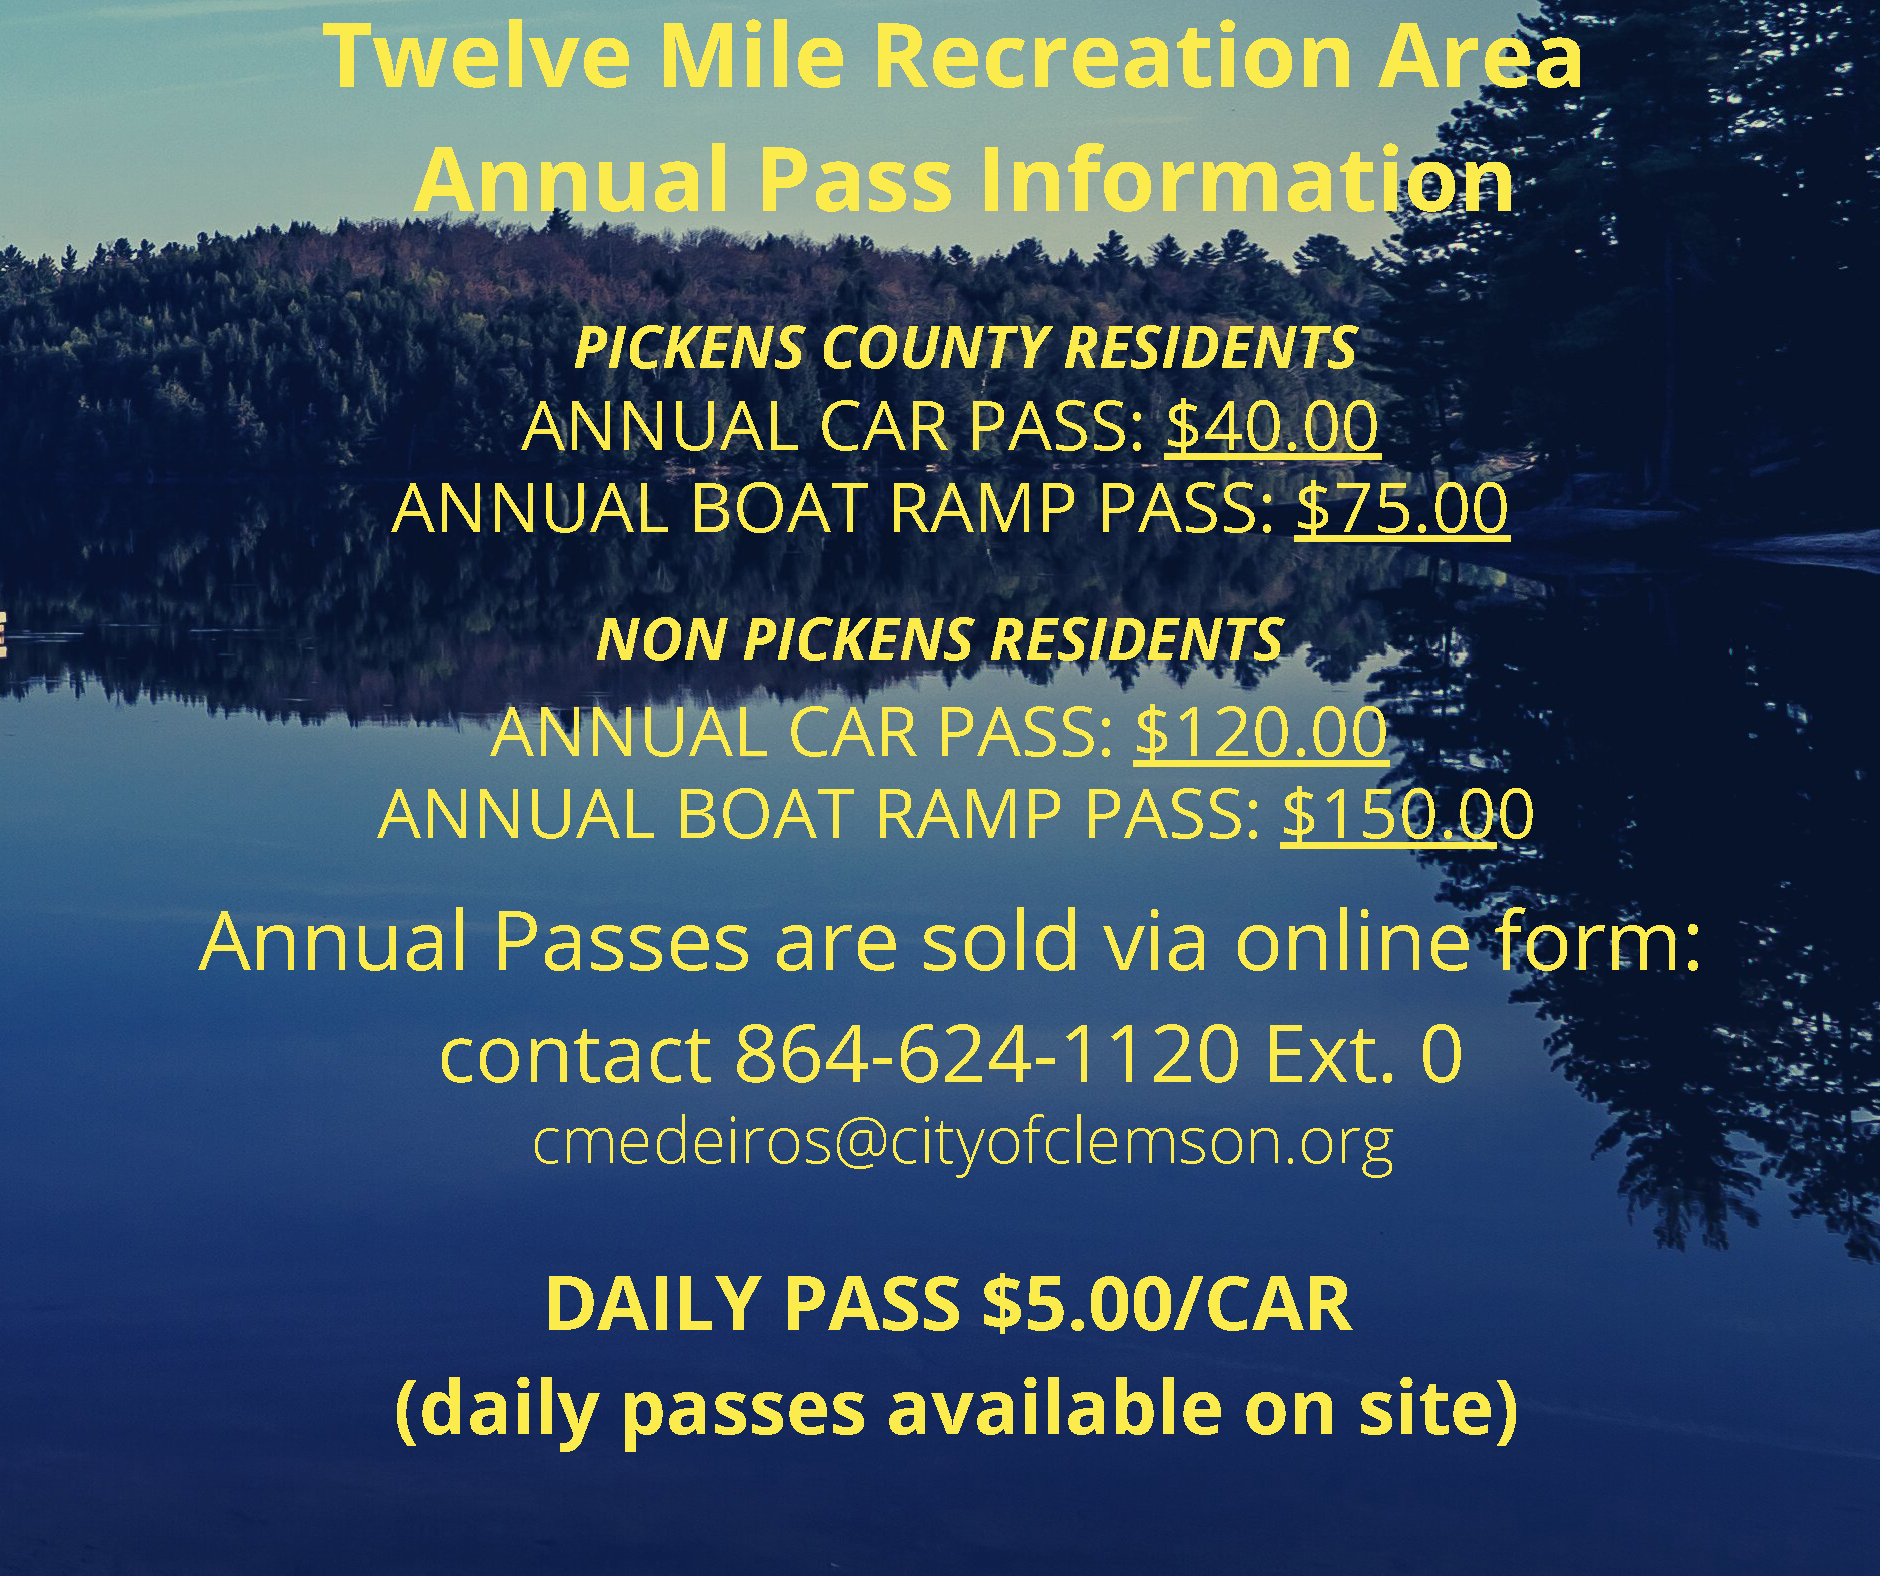 twelve mile recreation annual pass information - click to view larger image